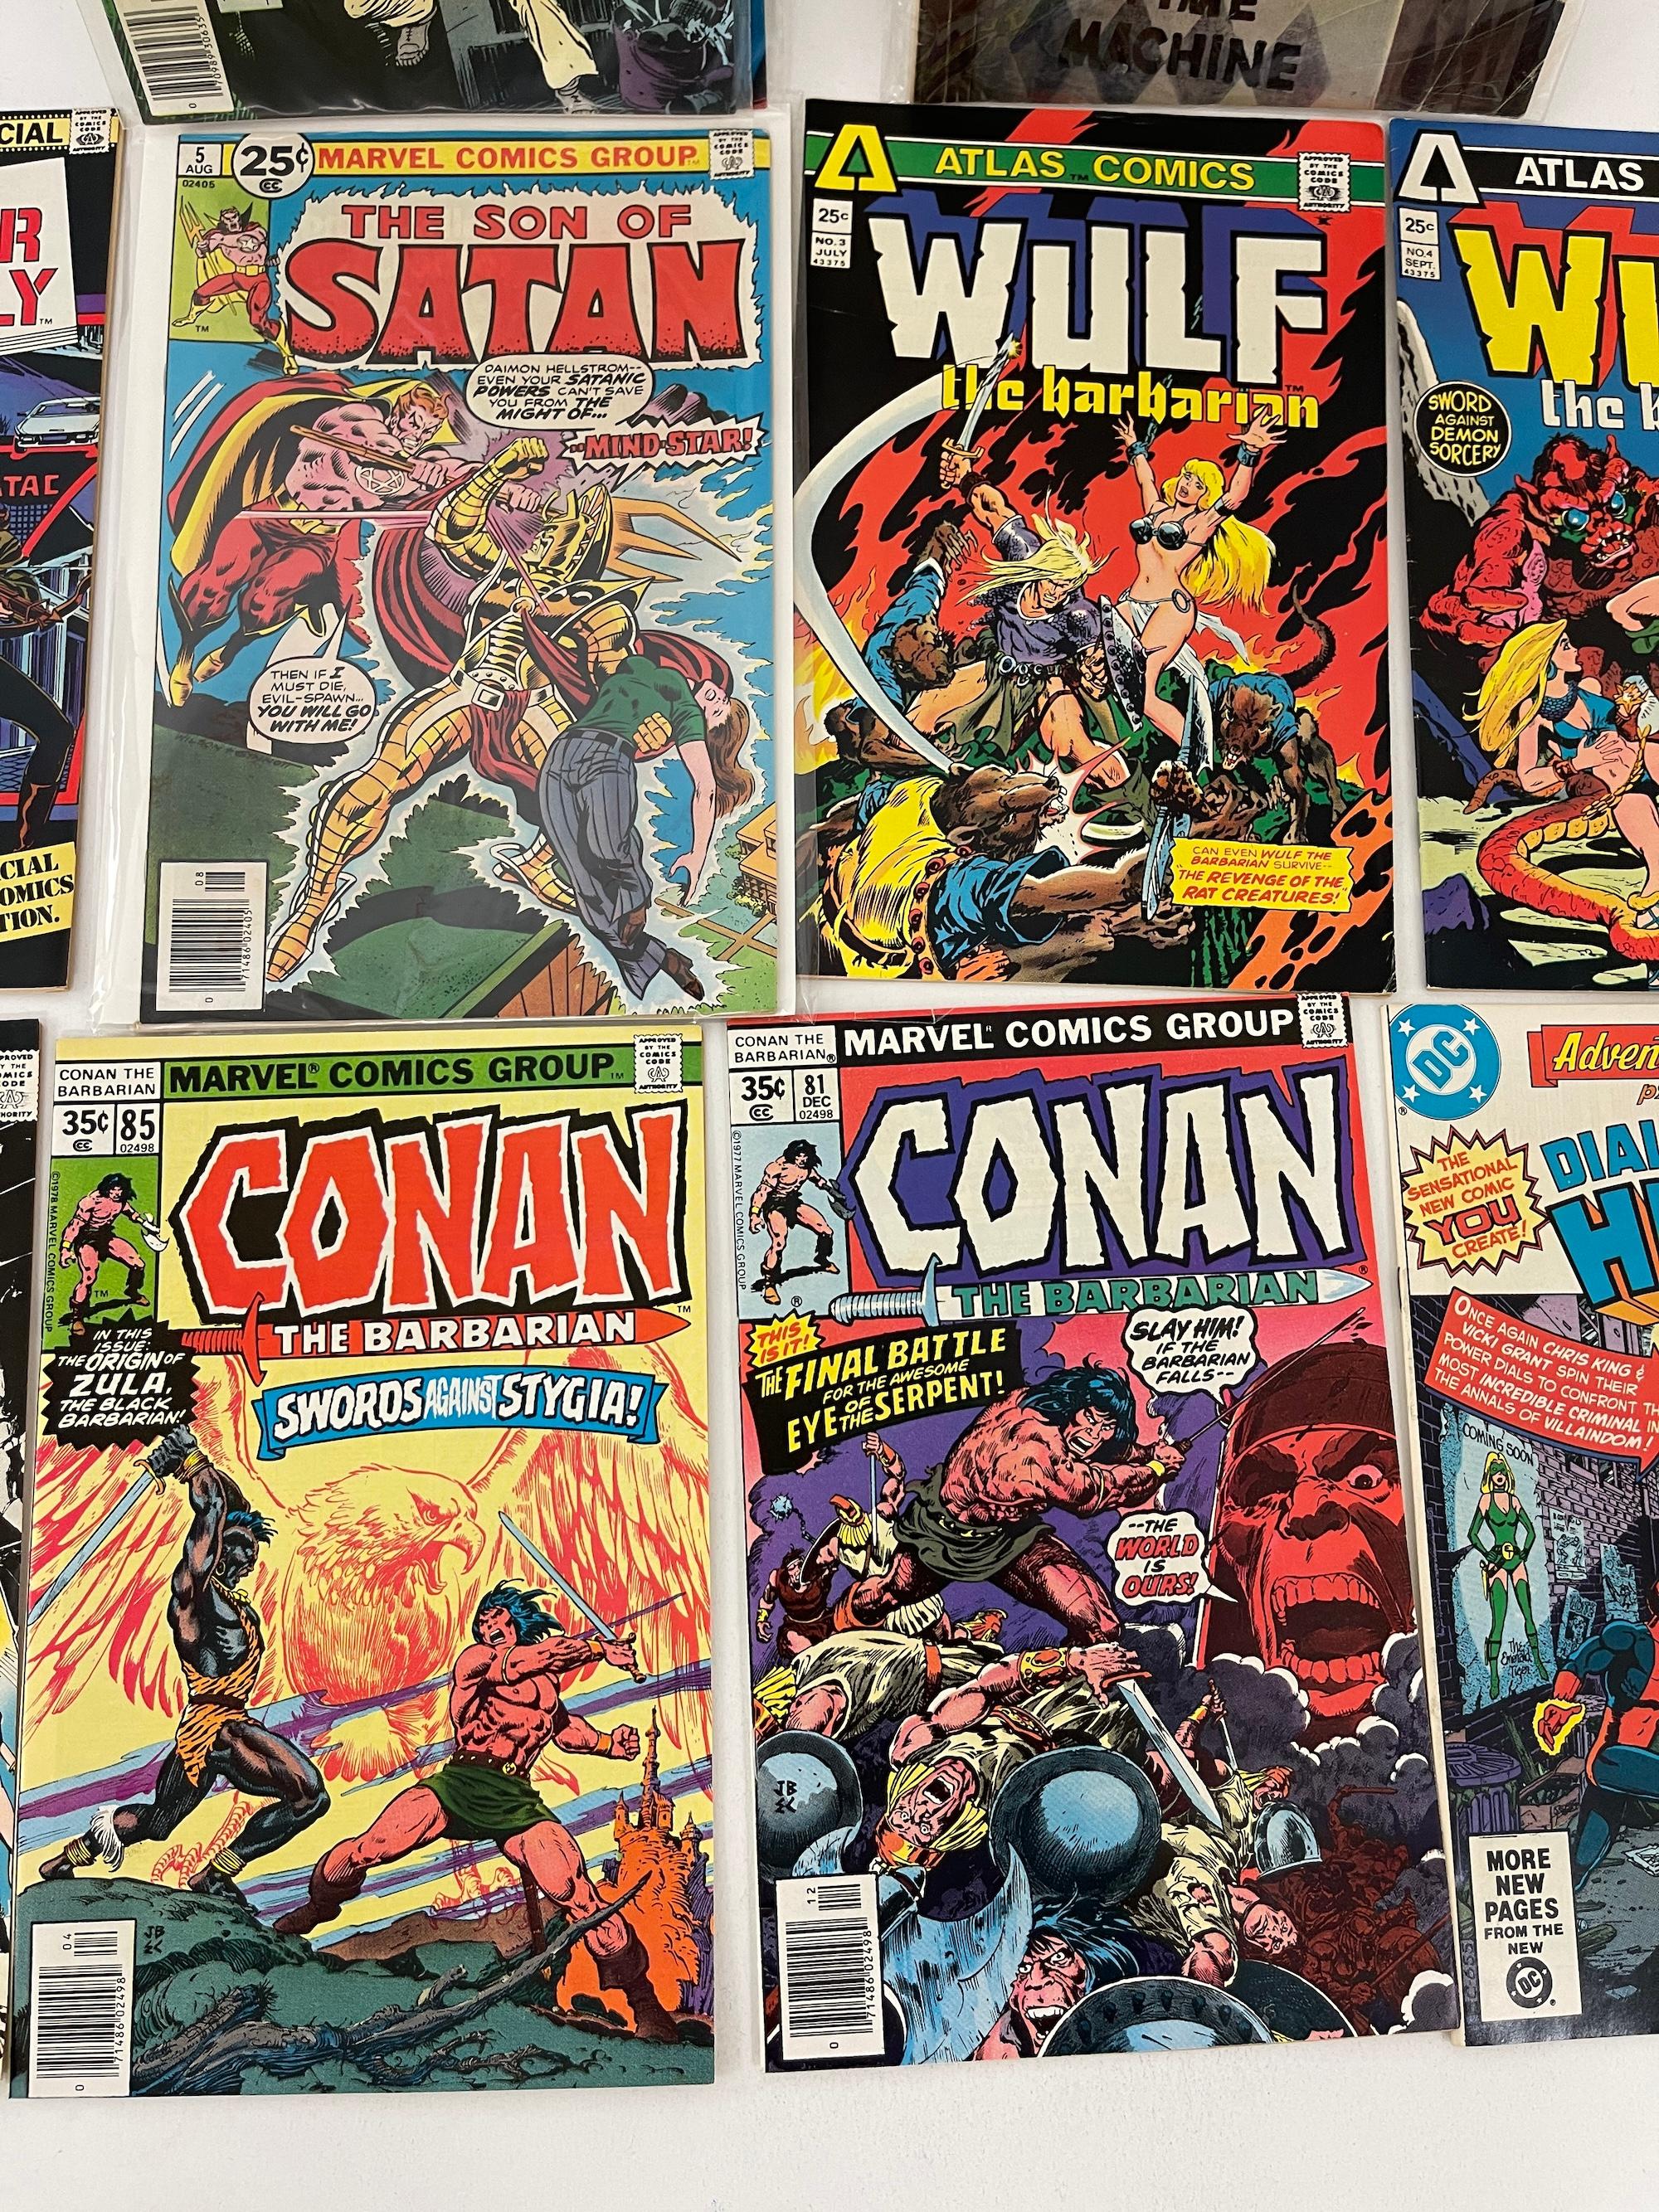 VINTAGE COMIC BOOK COLLECTION LOT VF